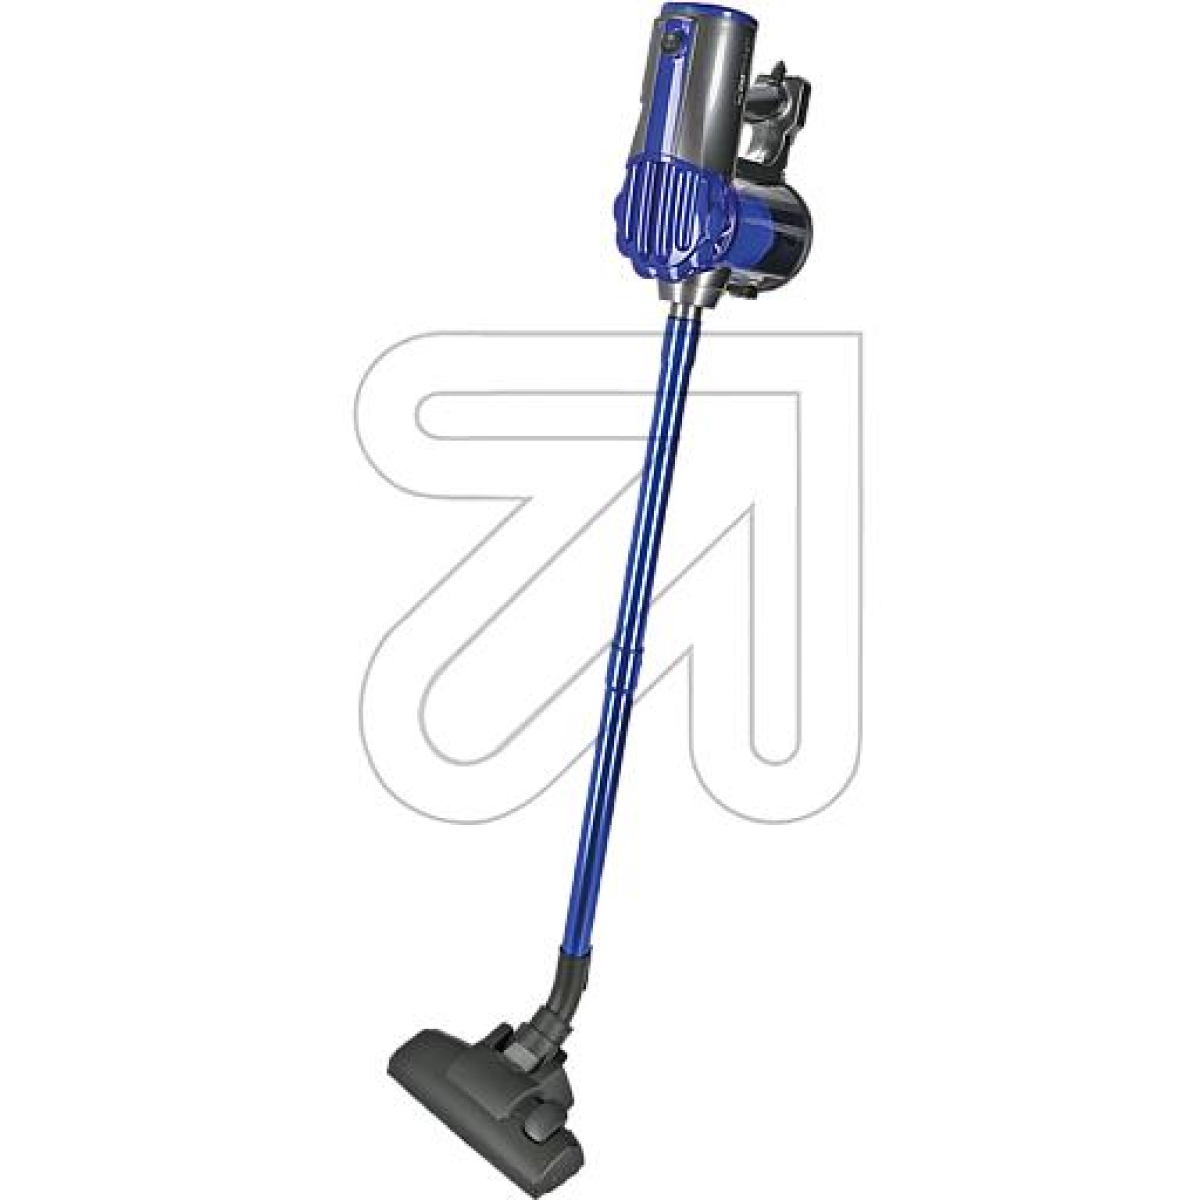 Clatronic263778 Hand/Canister Vacuum Cleaner BS 1306Article-No: 451025